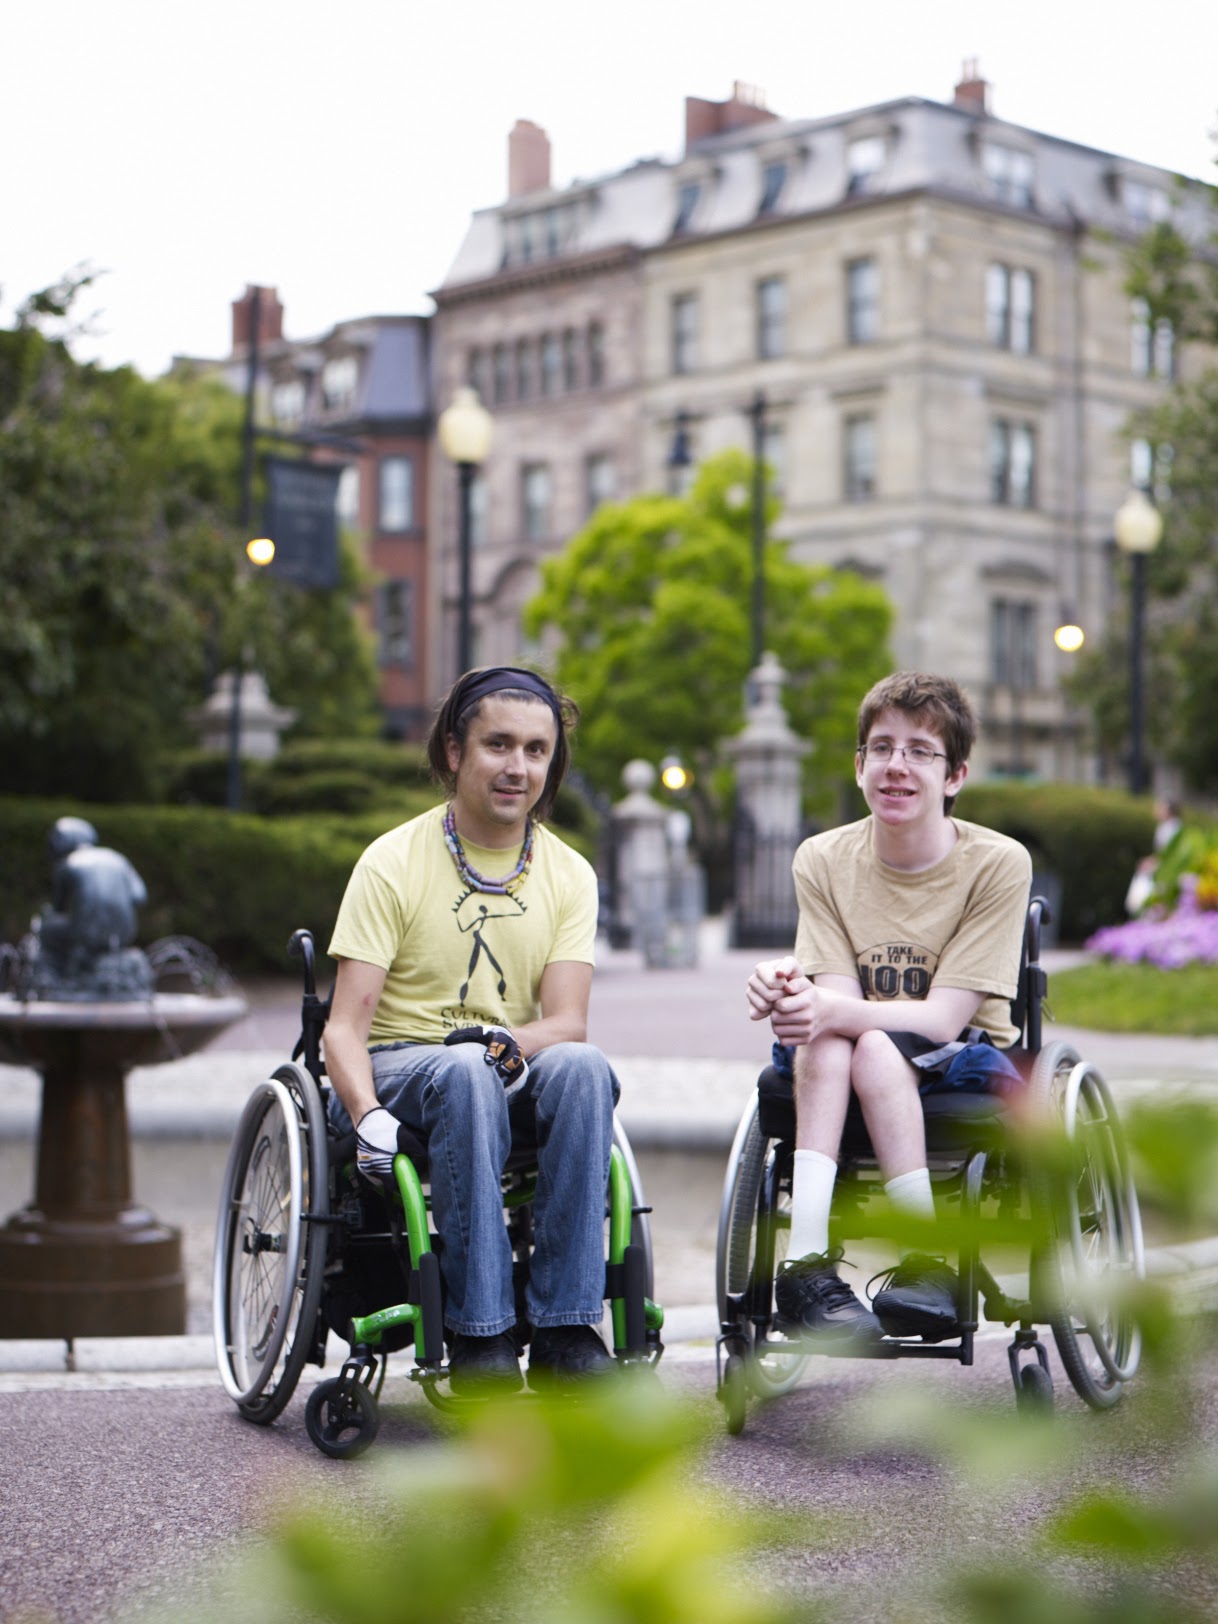 Tow people in wheel chairs smiling at camera, buildings in background